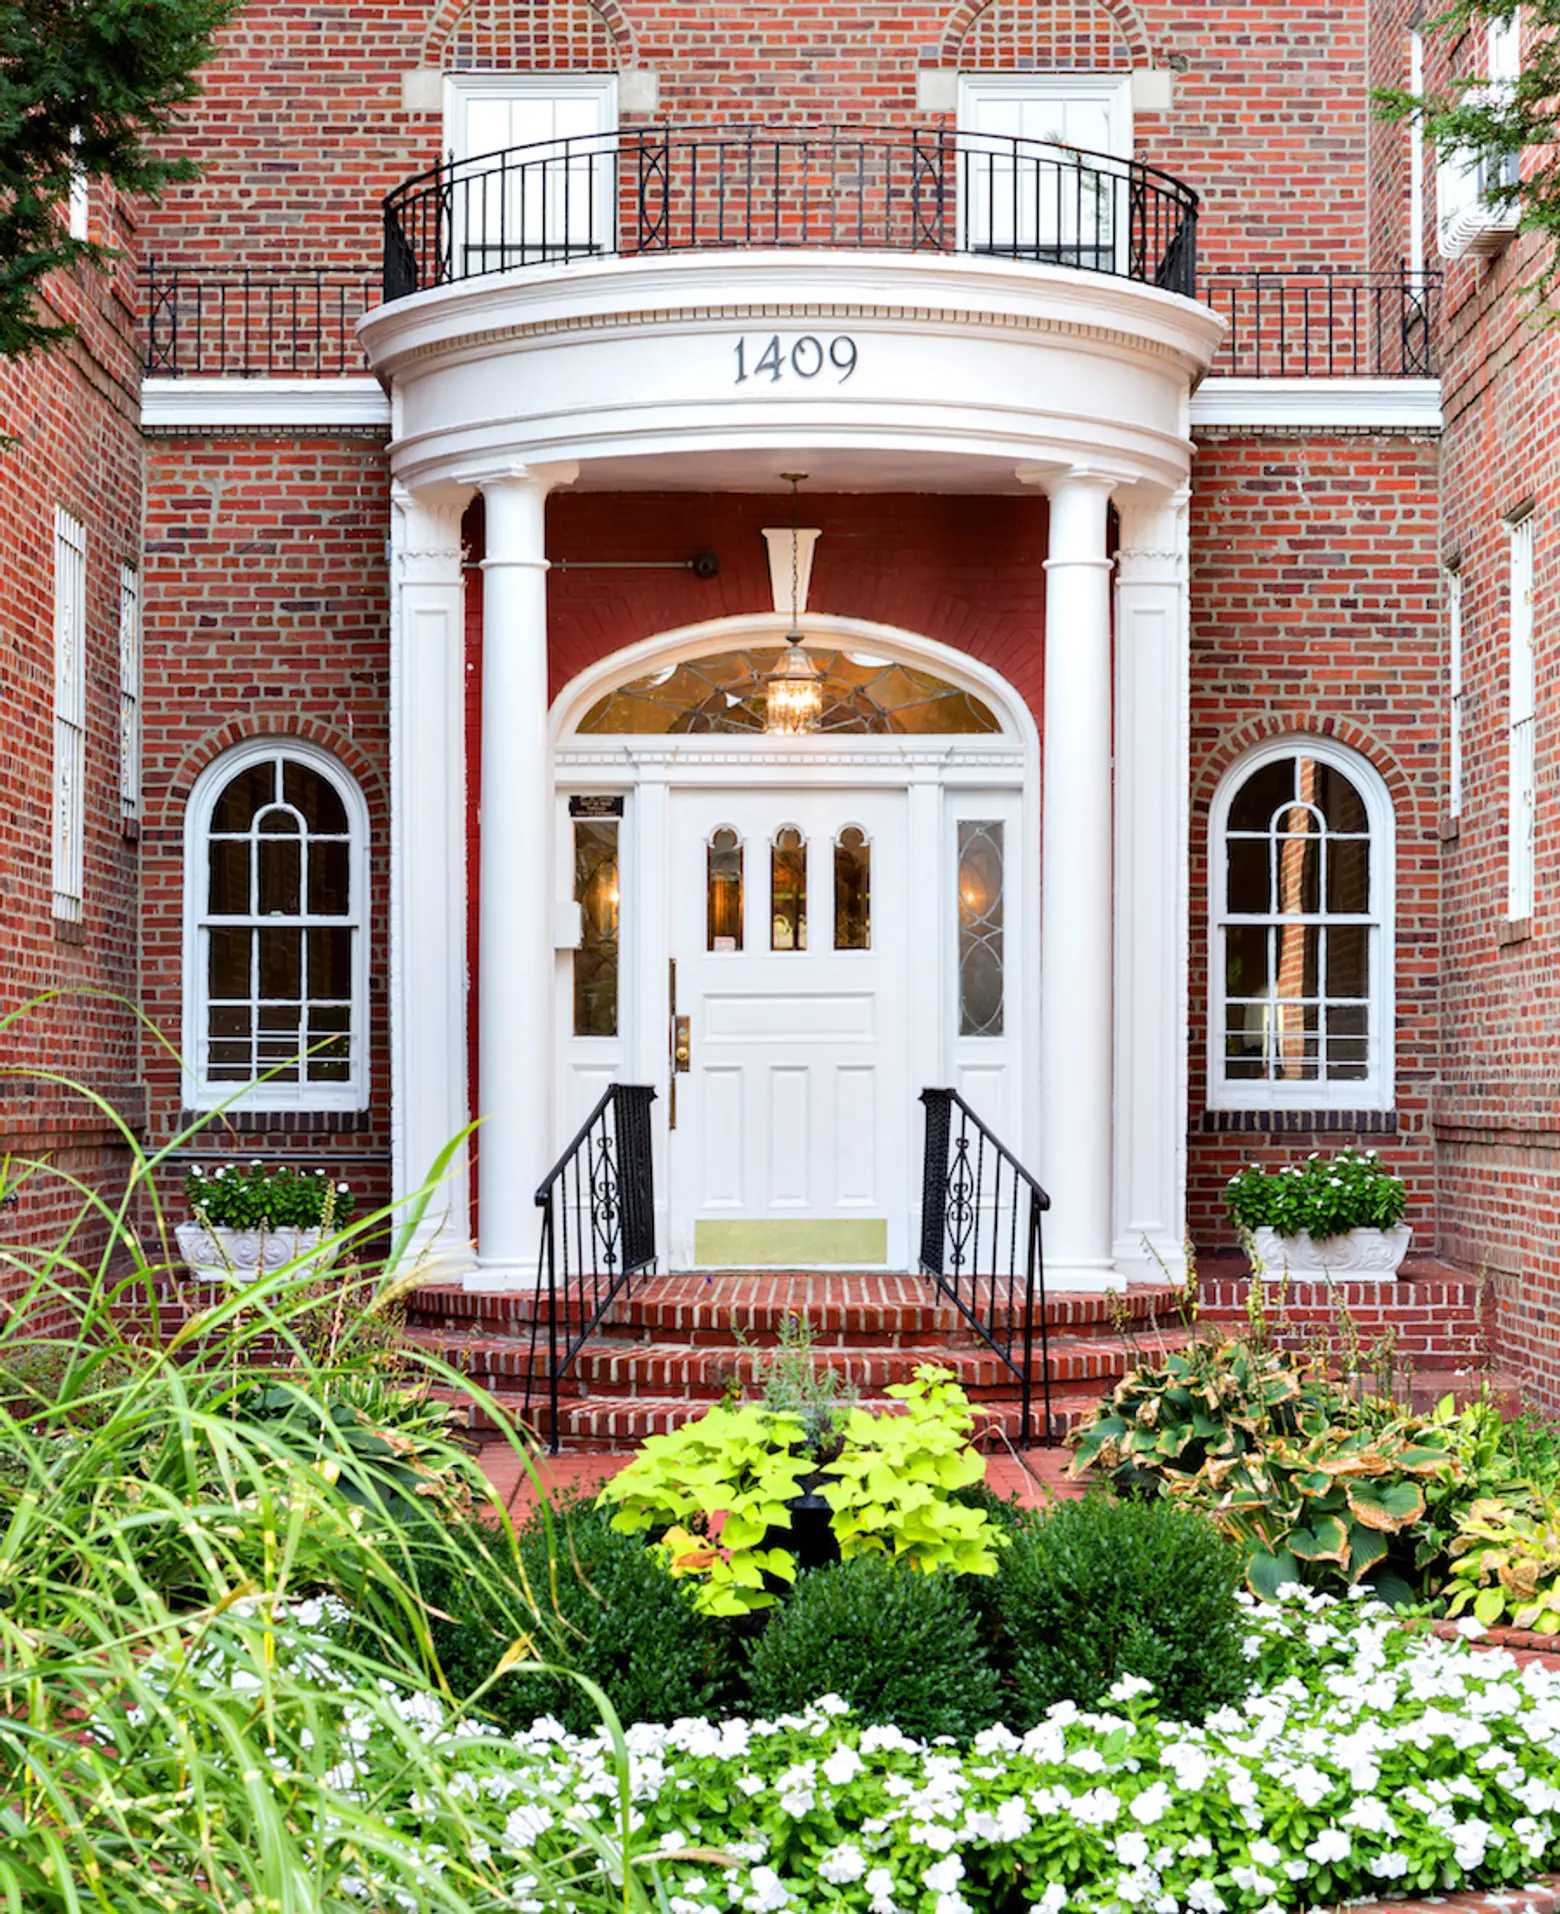 1409 Albermarle Road, Cool listings, ditmas park, Prospect Park South